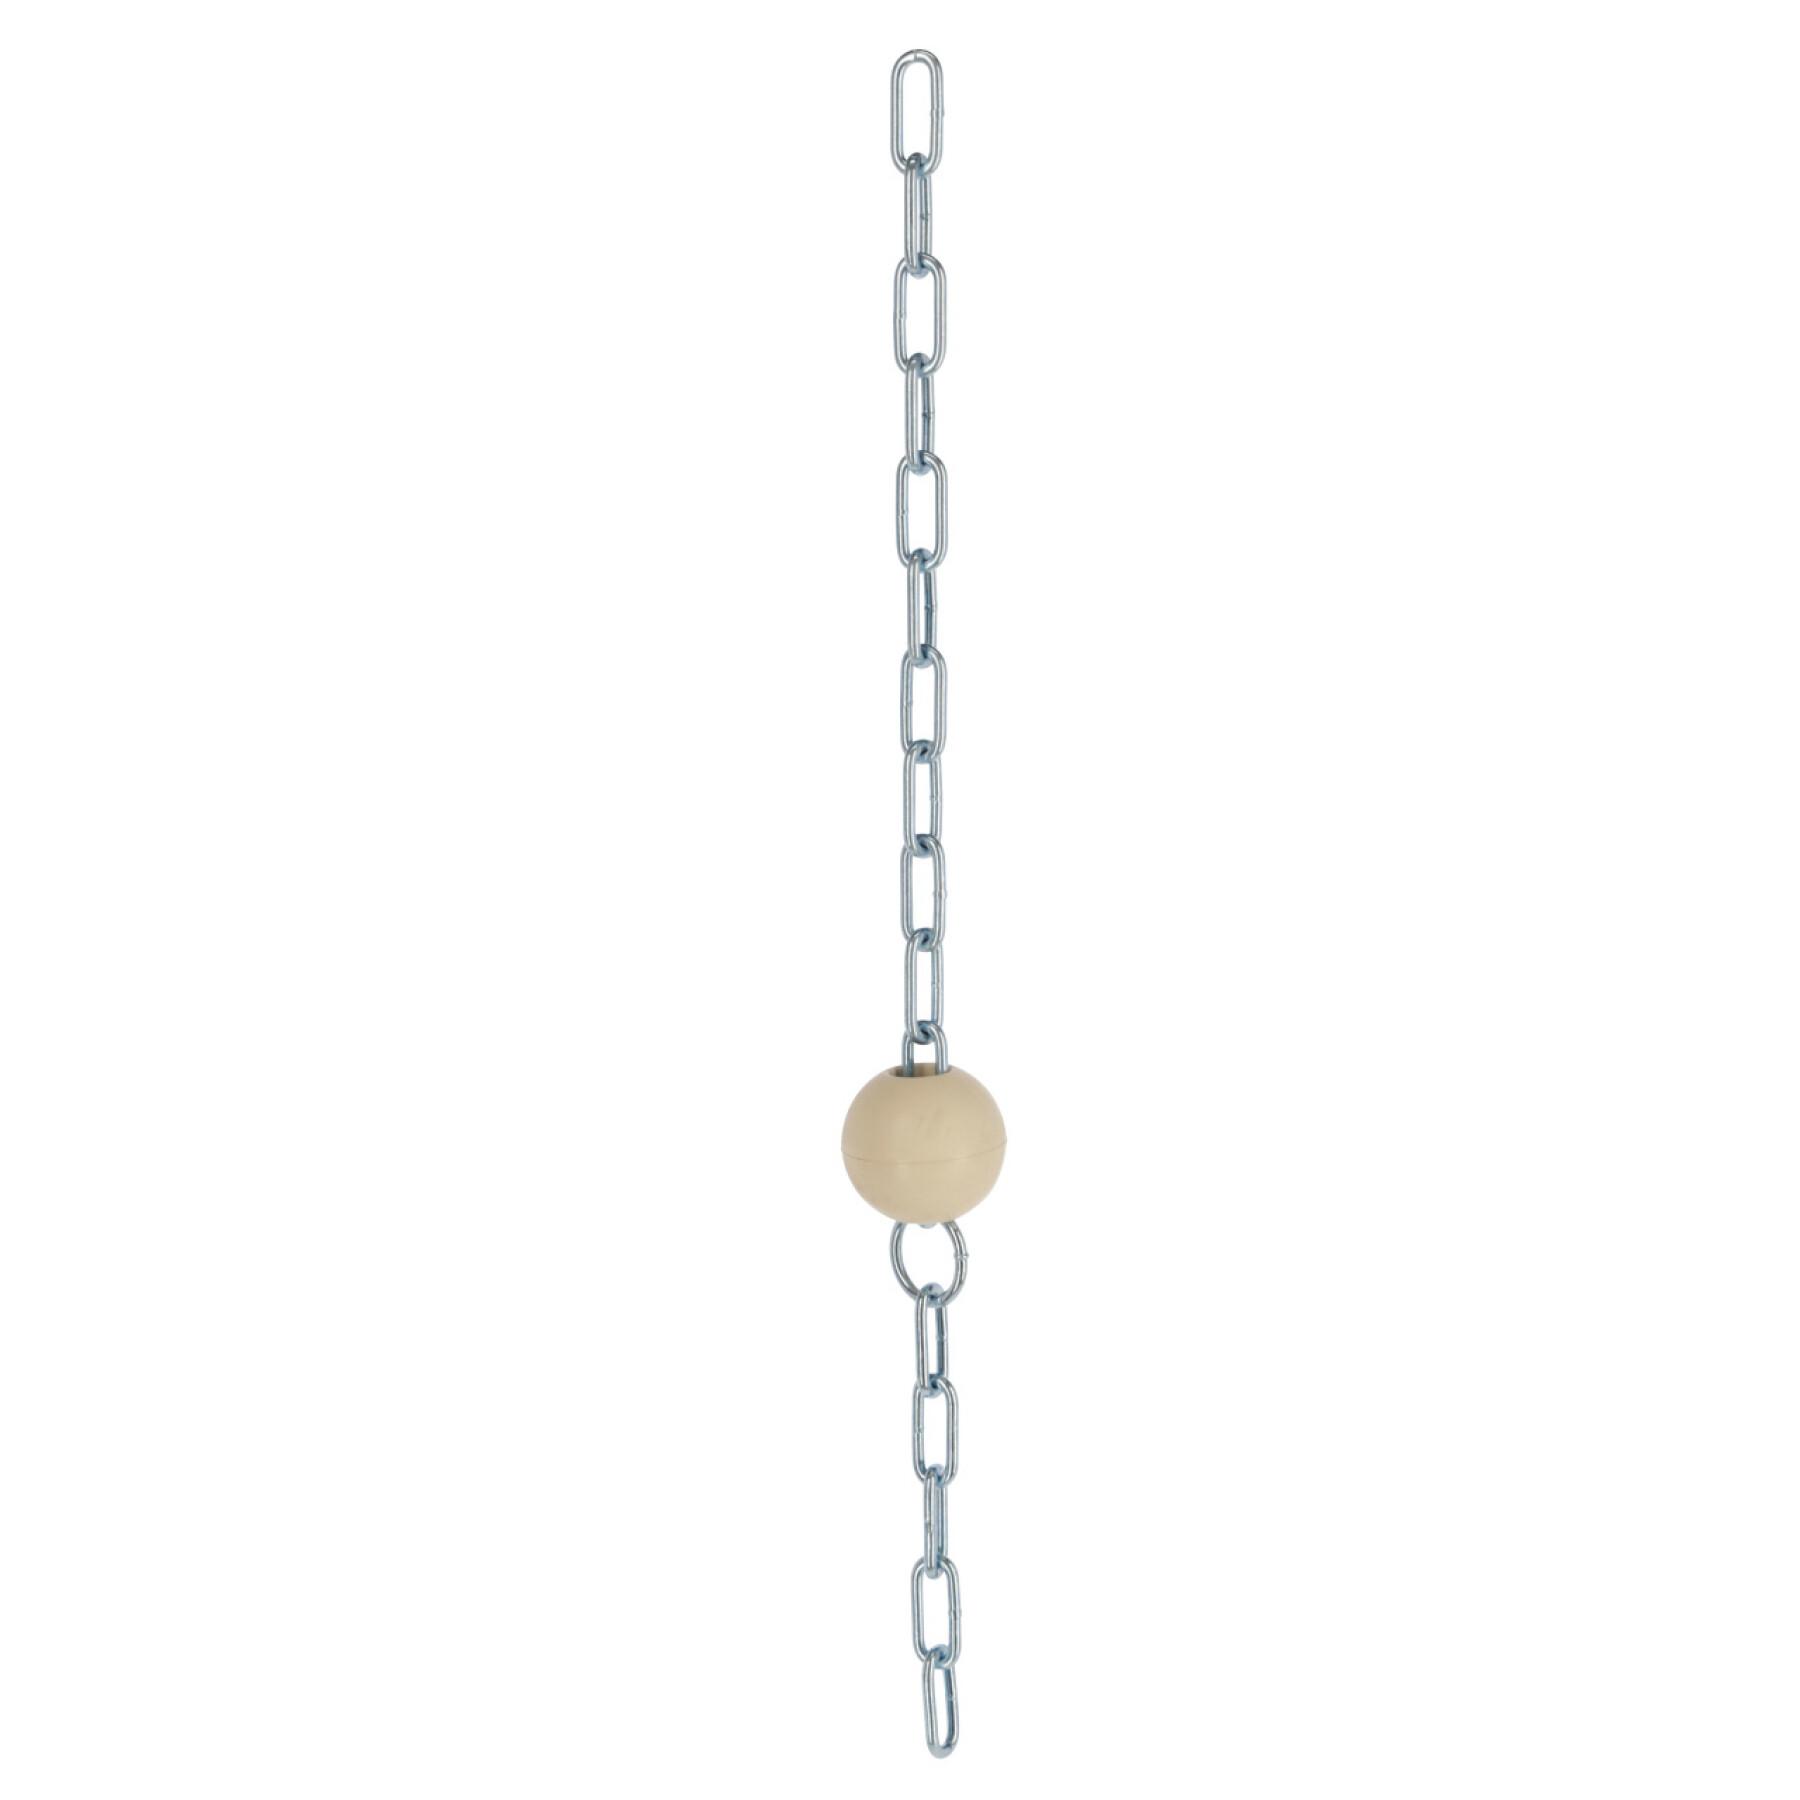 Set of 25 chew balls with chain Kerbl 22608